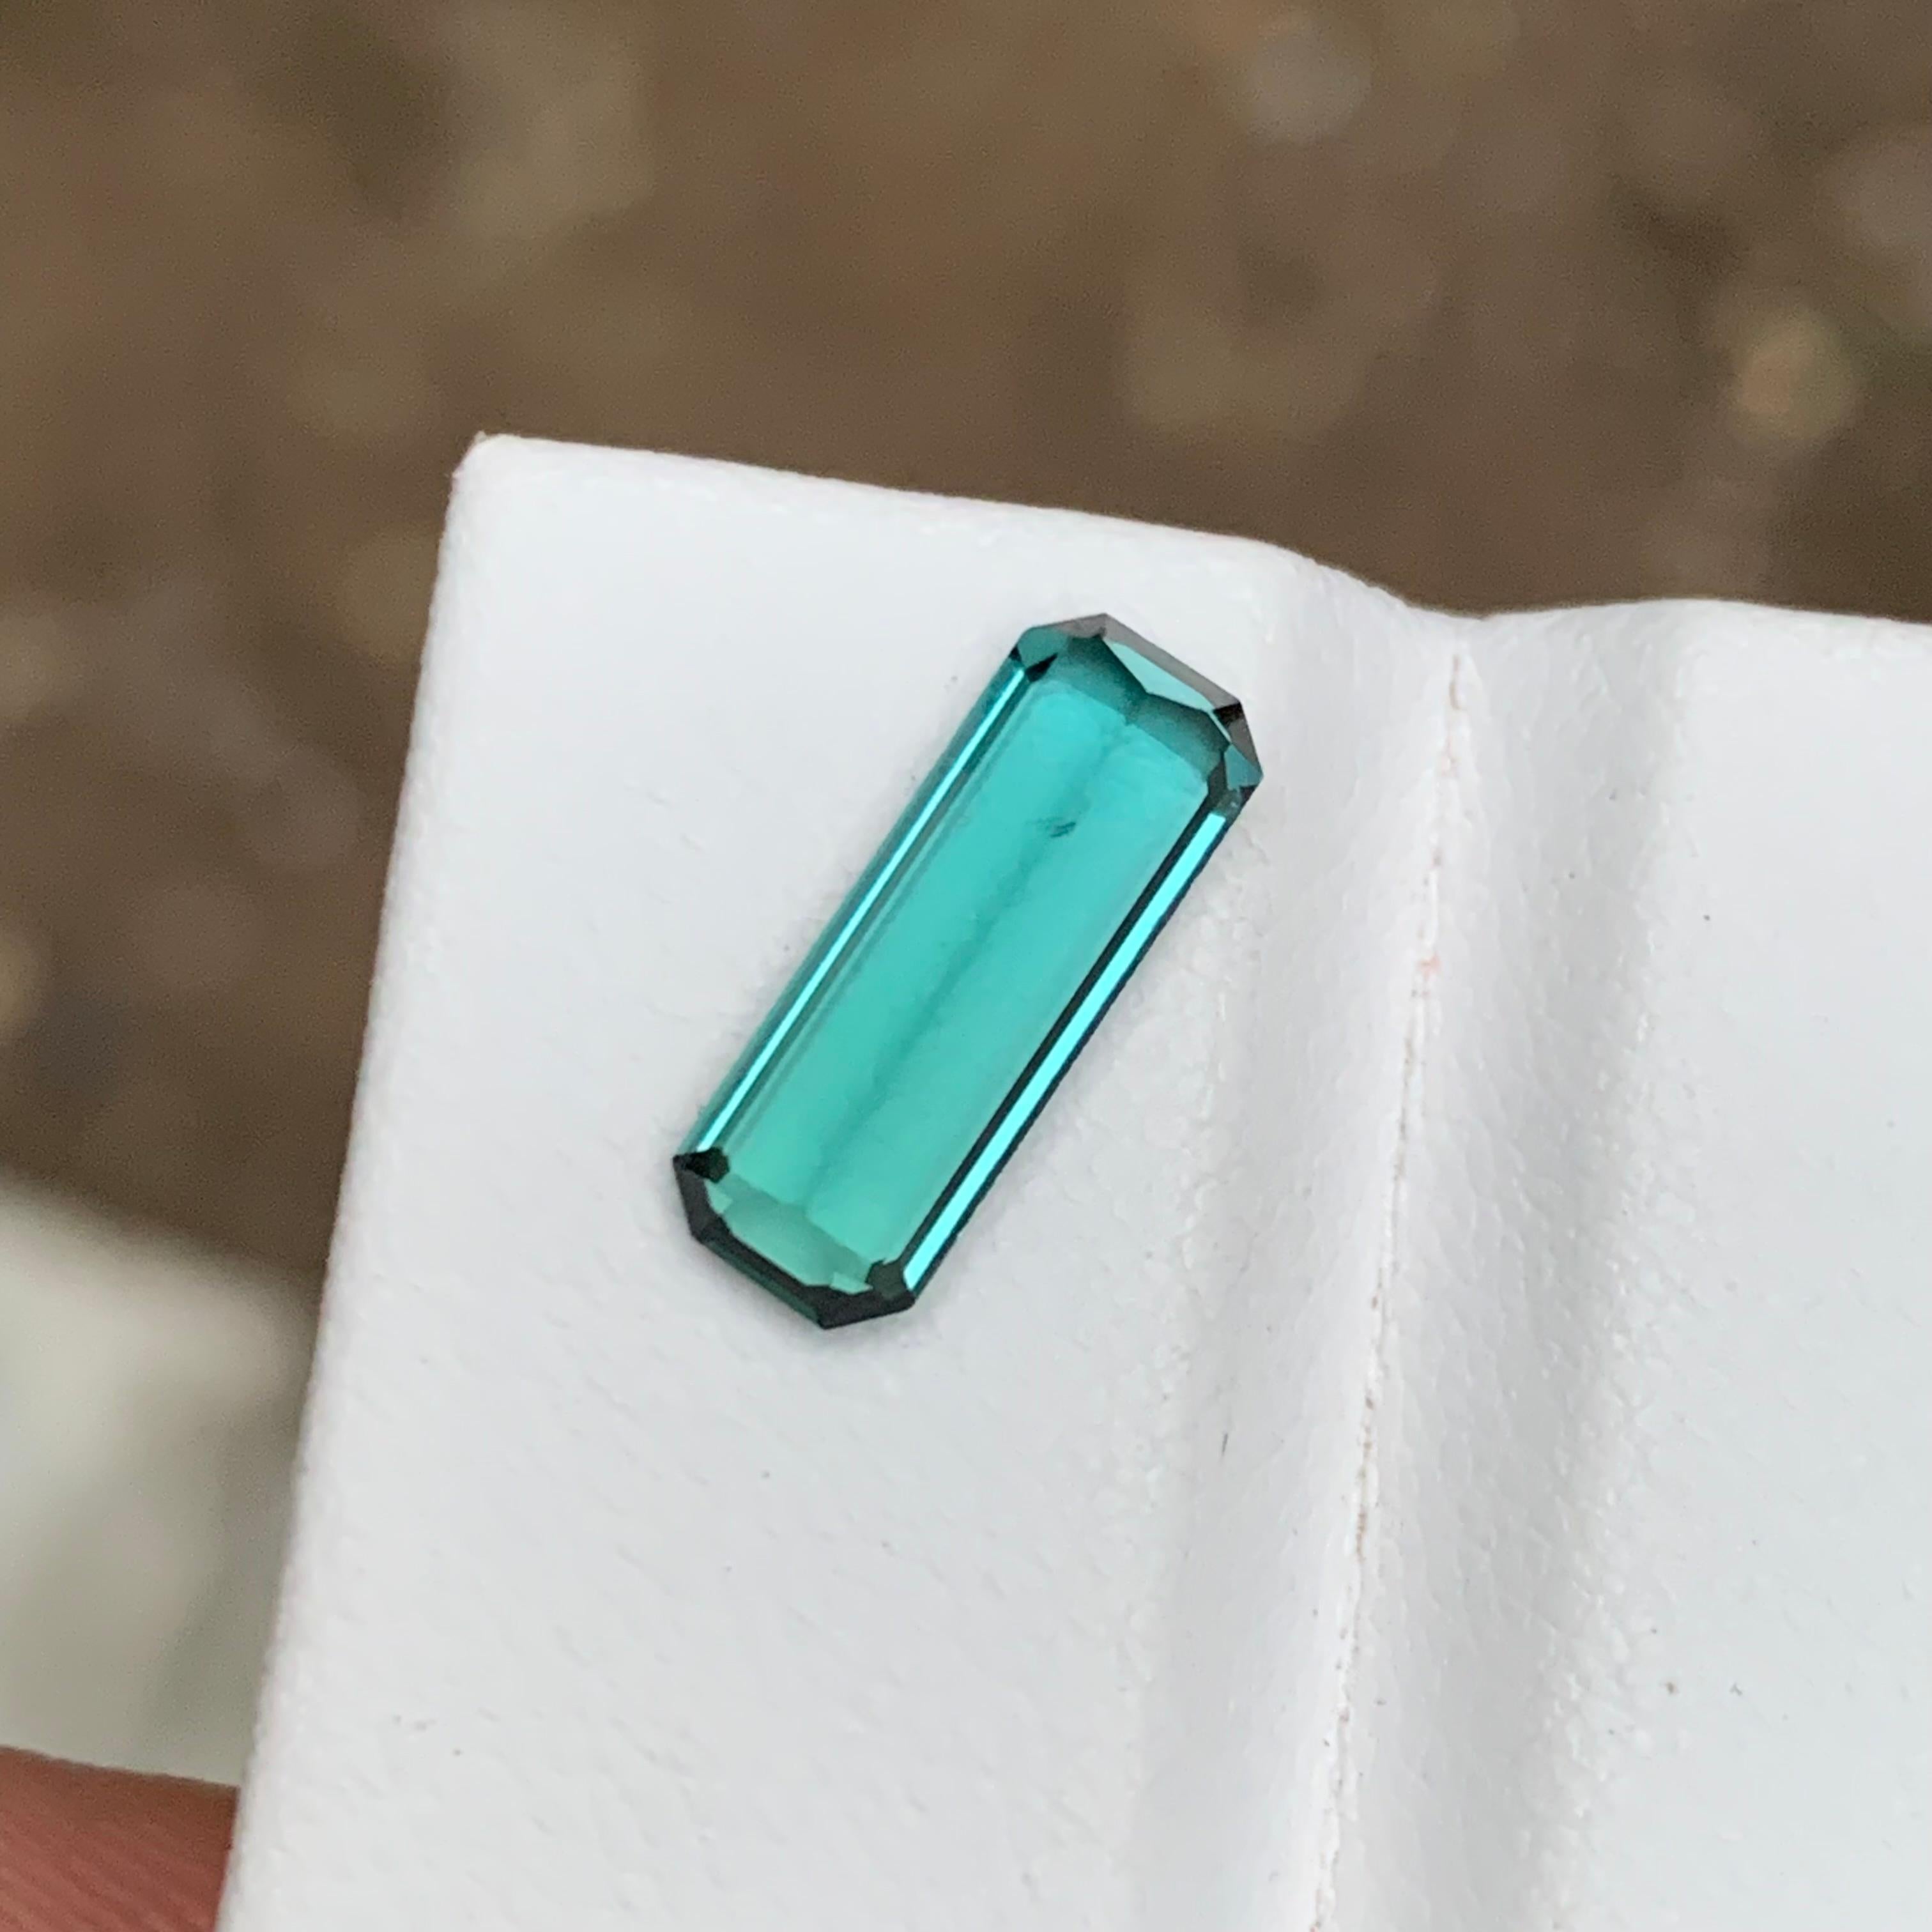 Rare Vivid Neon Bluish Green Hue Tourmaline Gemstone 1.75Ct Emerald Cut for Ring In New Condition For Sale In Peshawar, PK